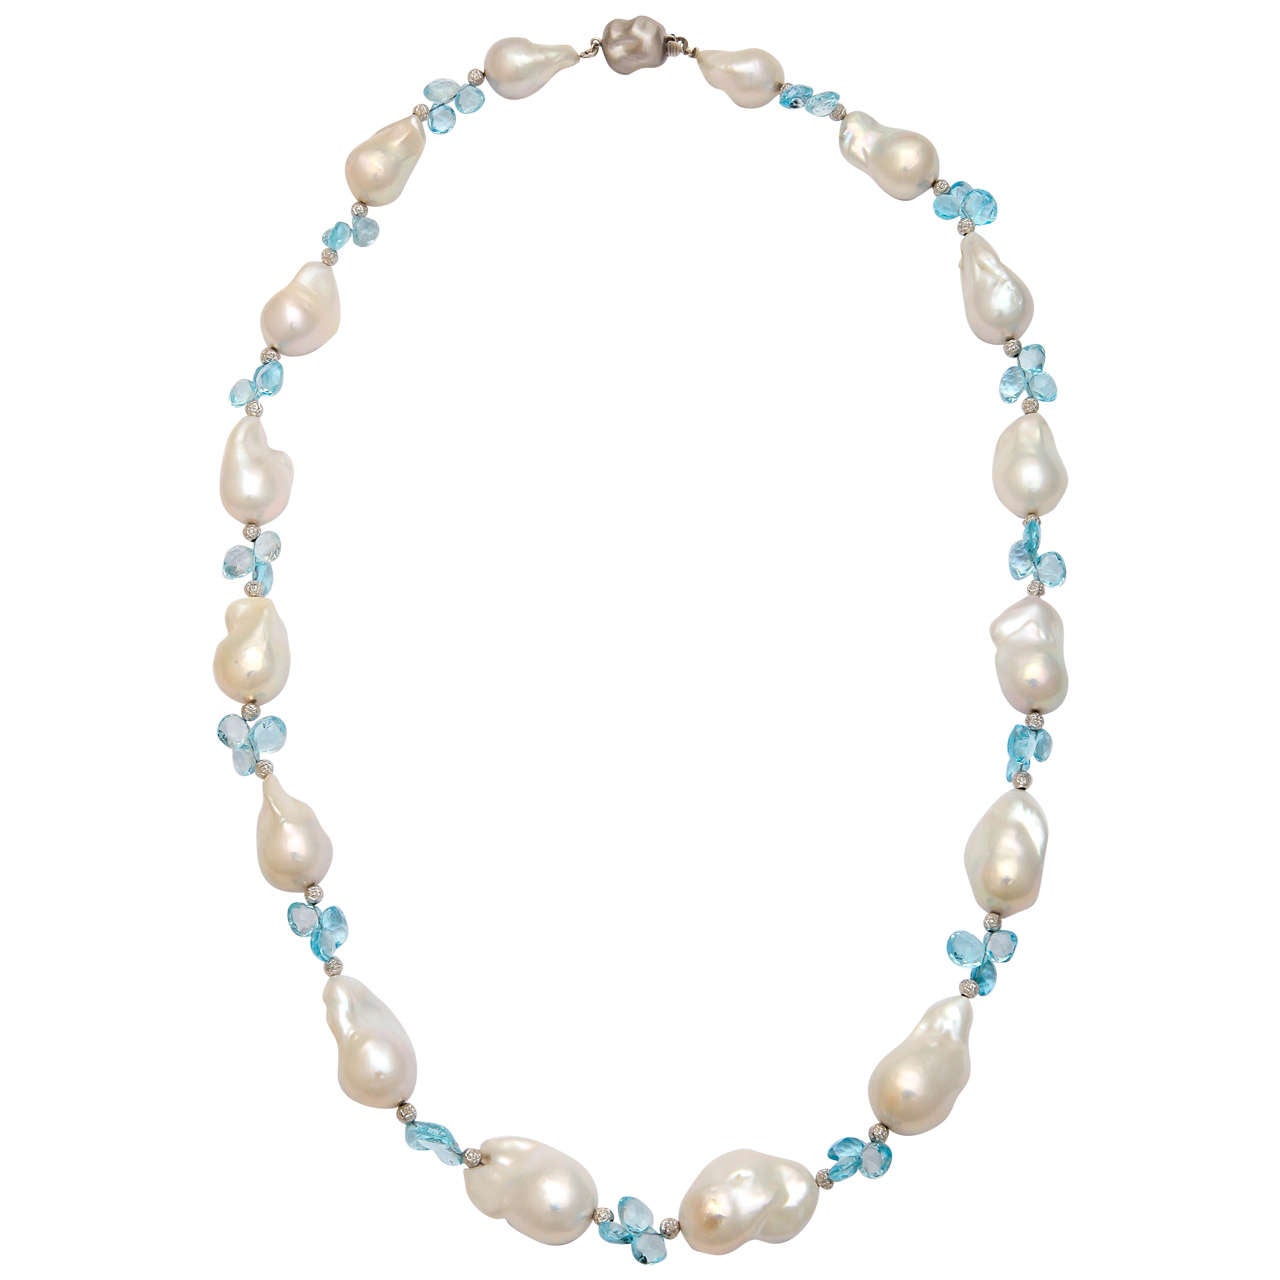 Large Baroque Pearls with Blue Topaz Briolettes